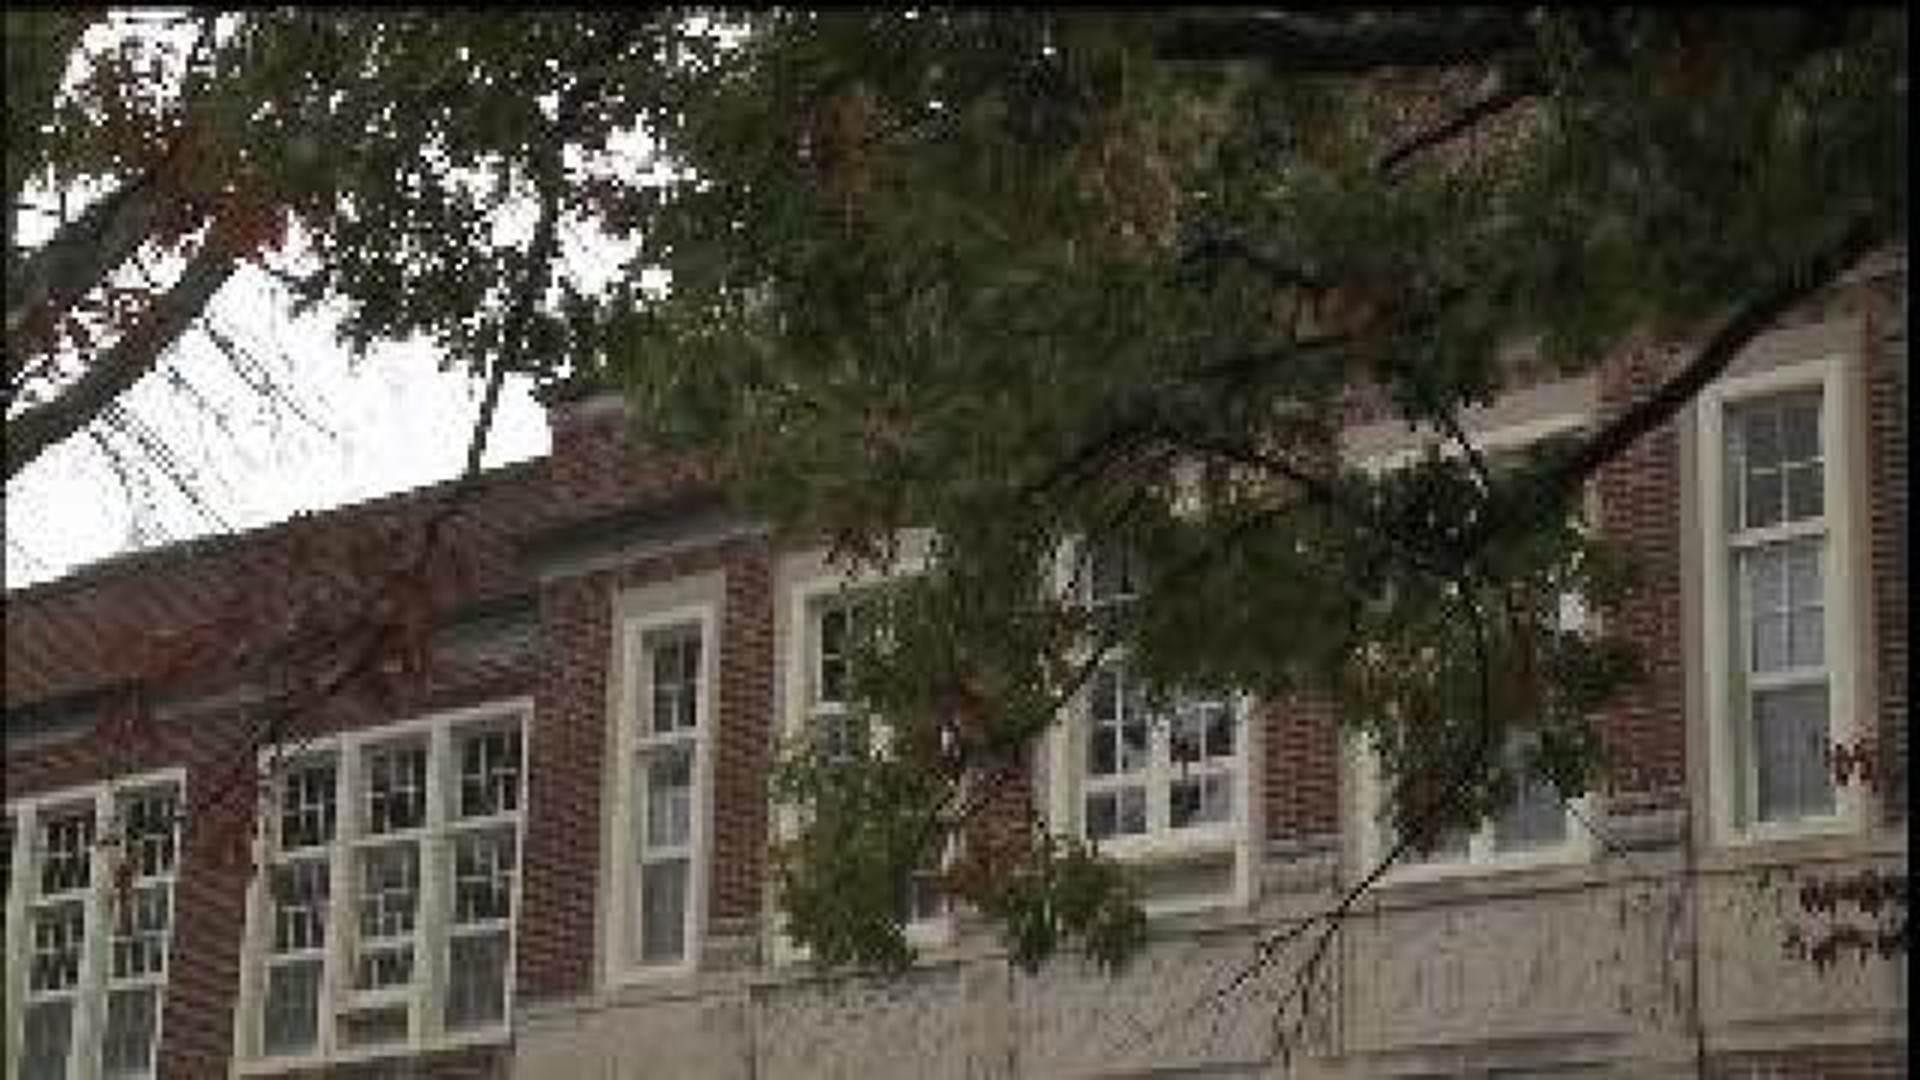 Audobon School to be torn down